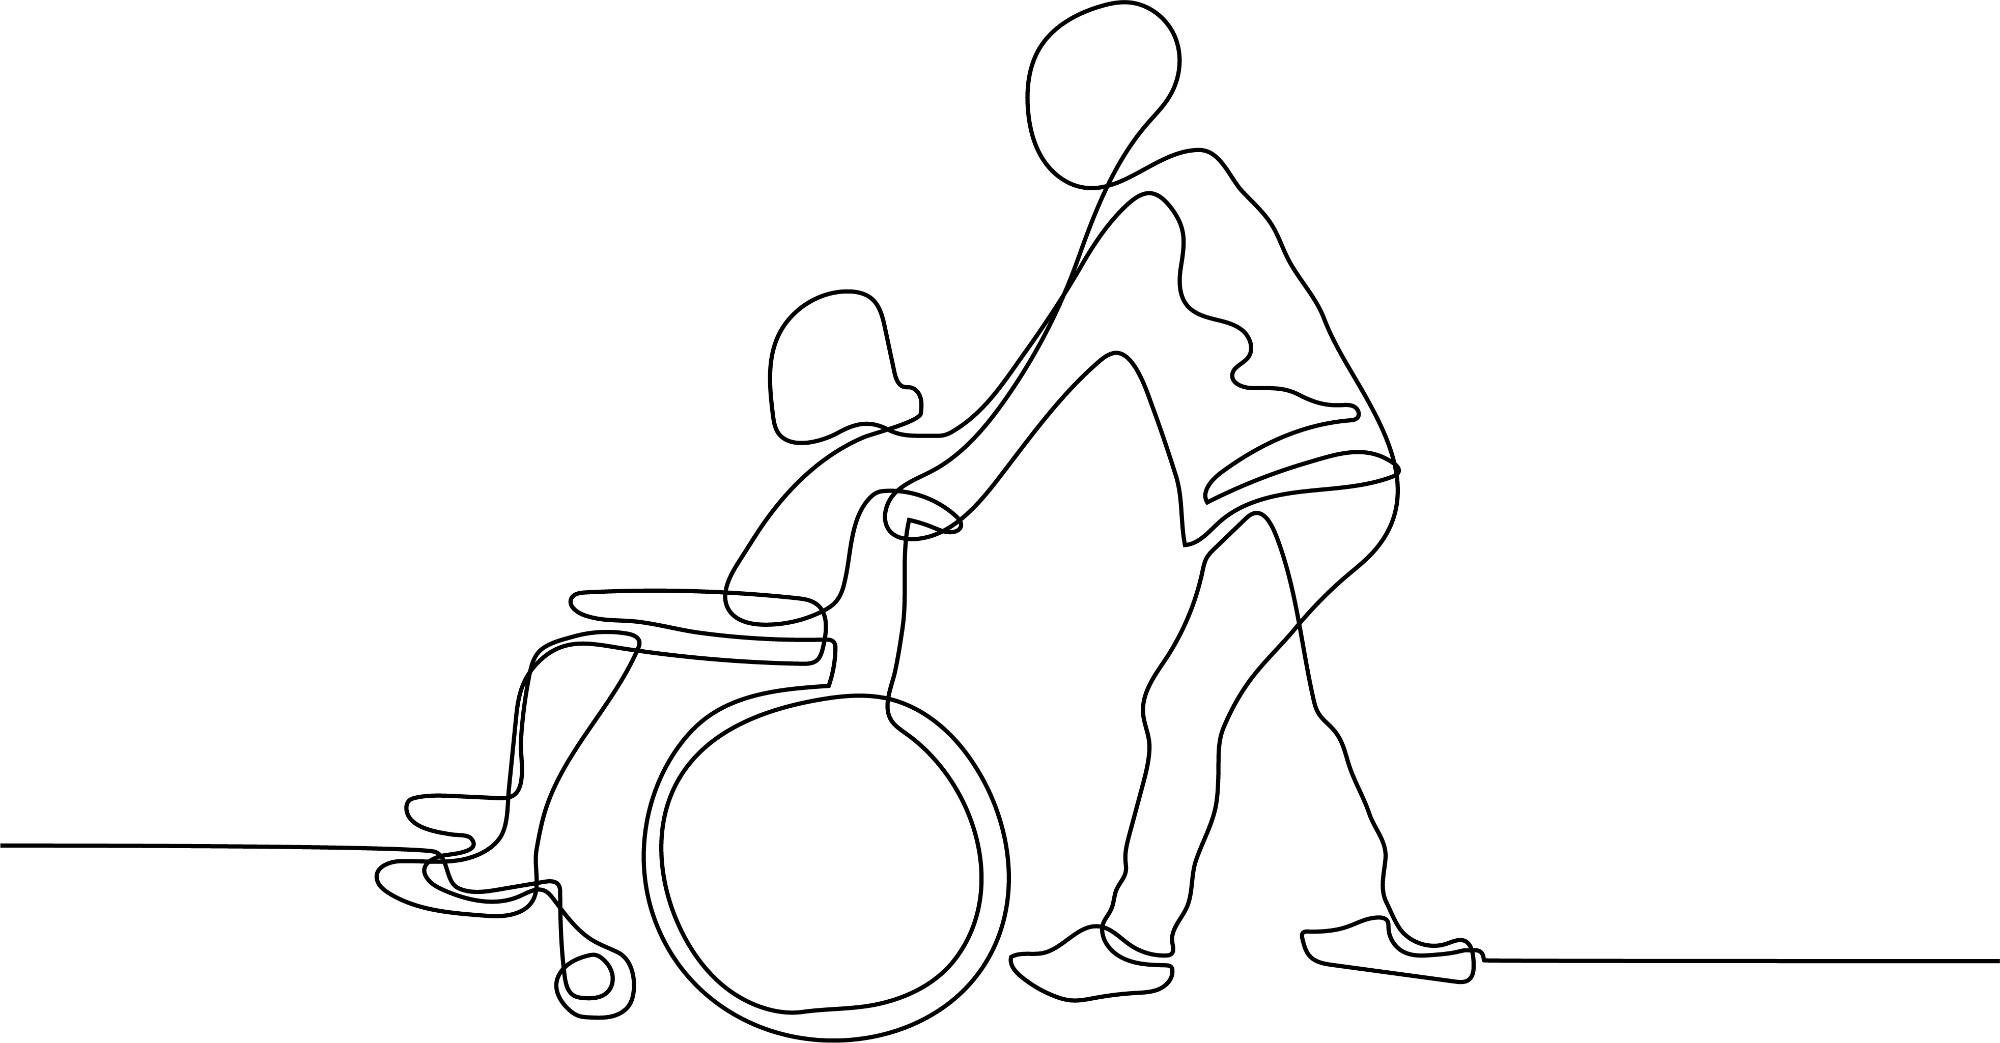 continuous line drawing of man pushing a wheelchair with a patient